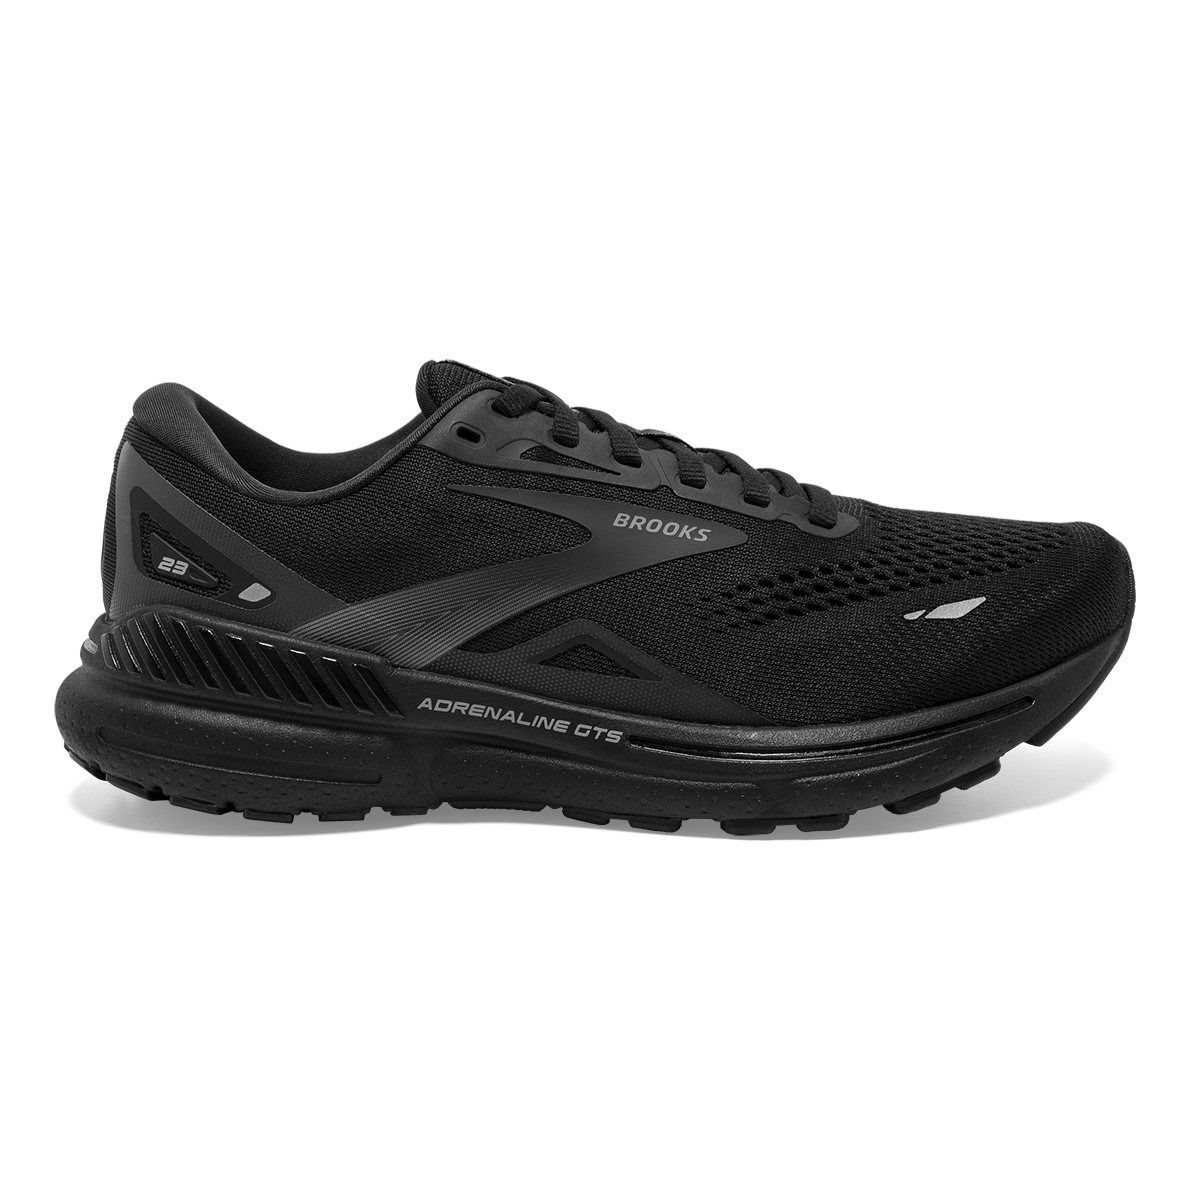 Lateral view of the Men's Adrenaline GTS 23 by Brook's in the color Black/Black/Ebony